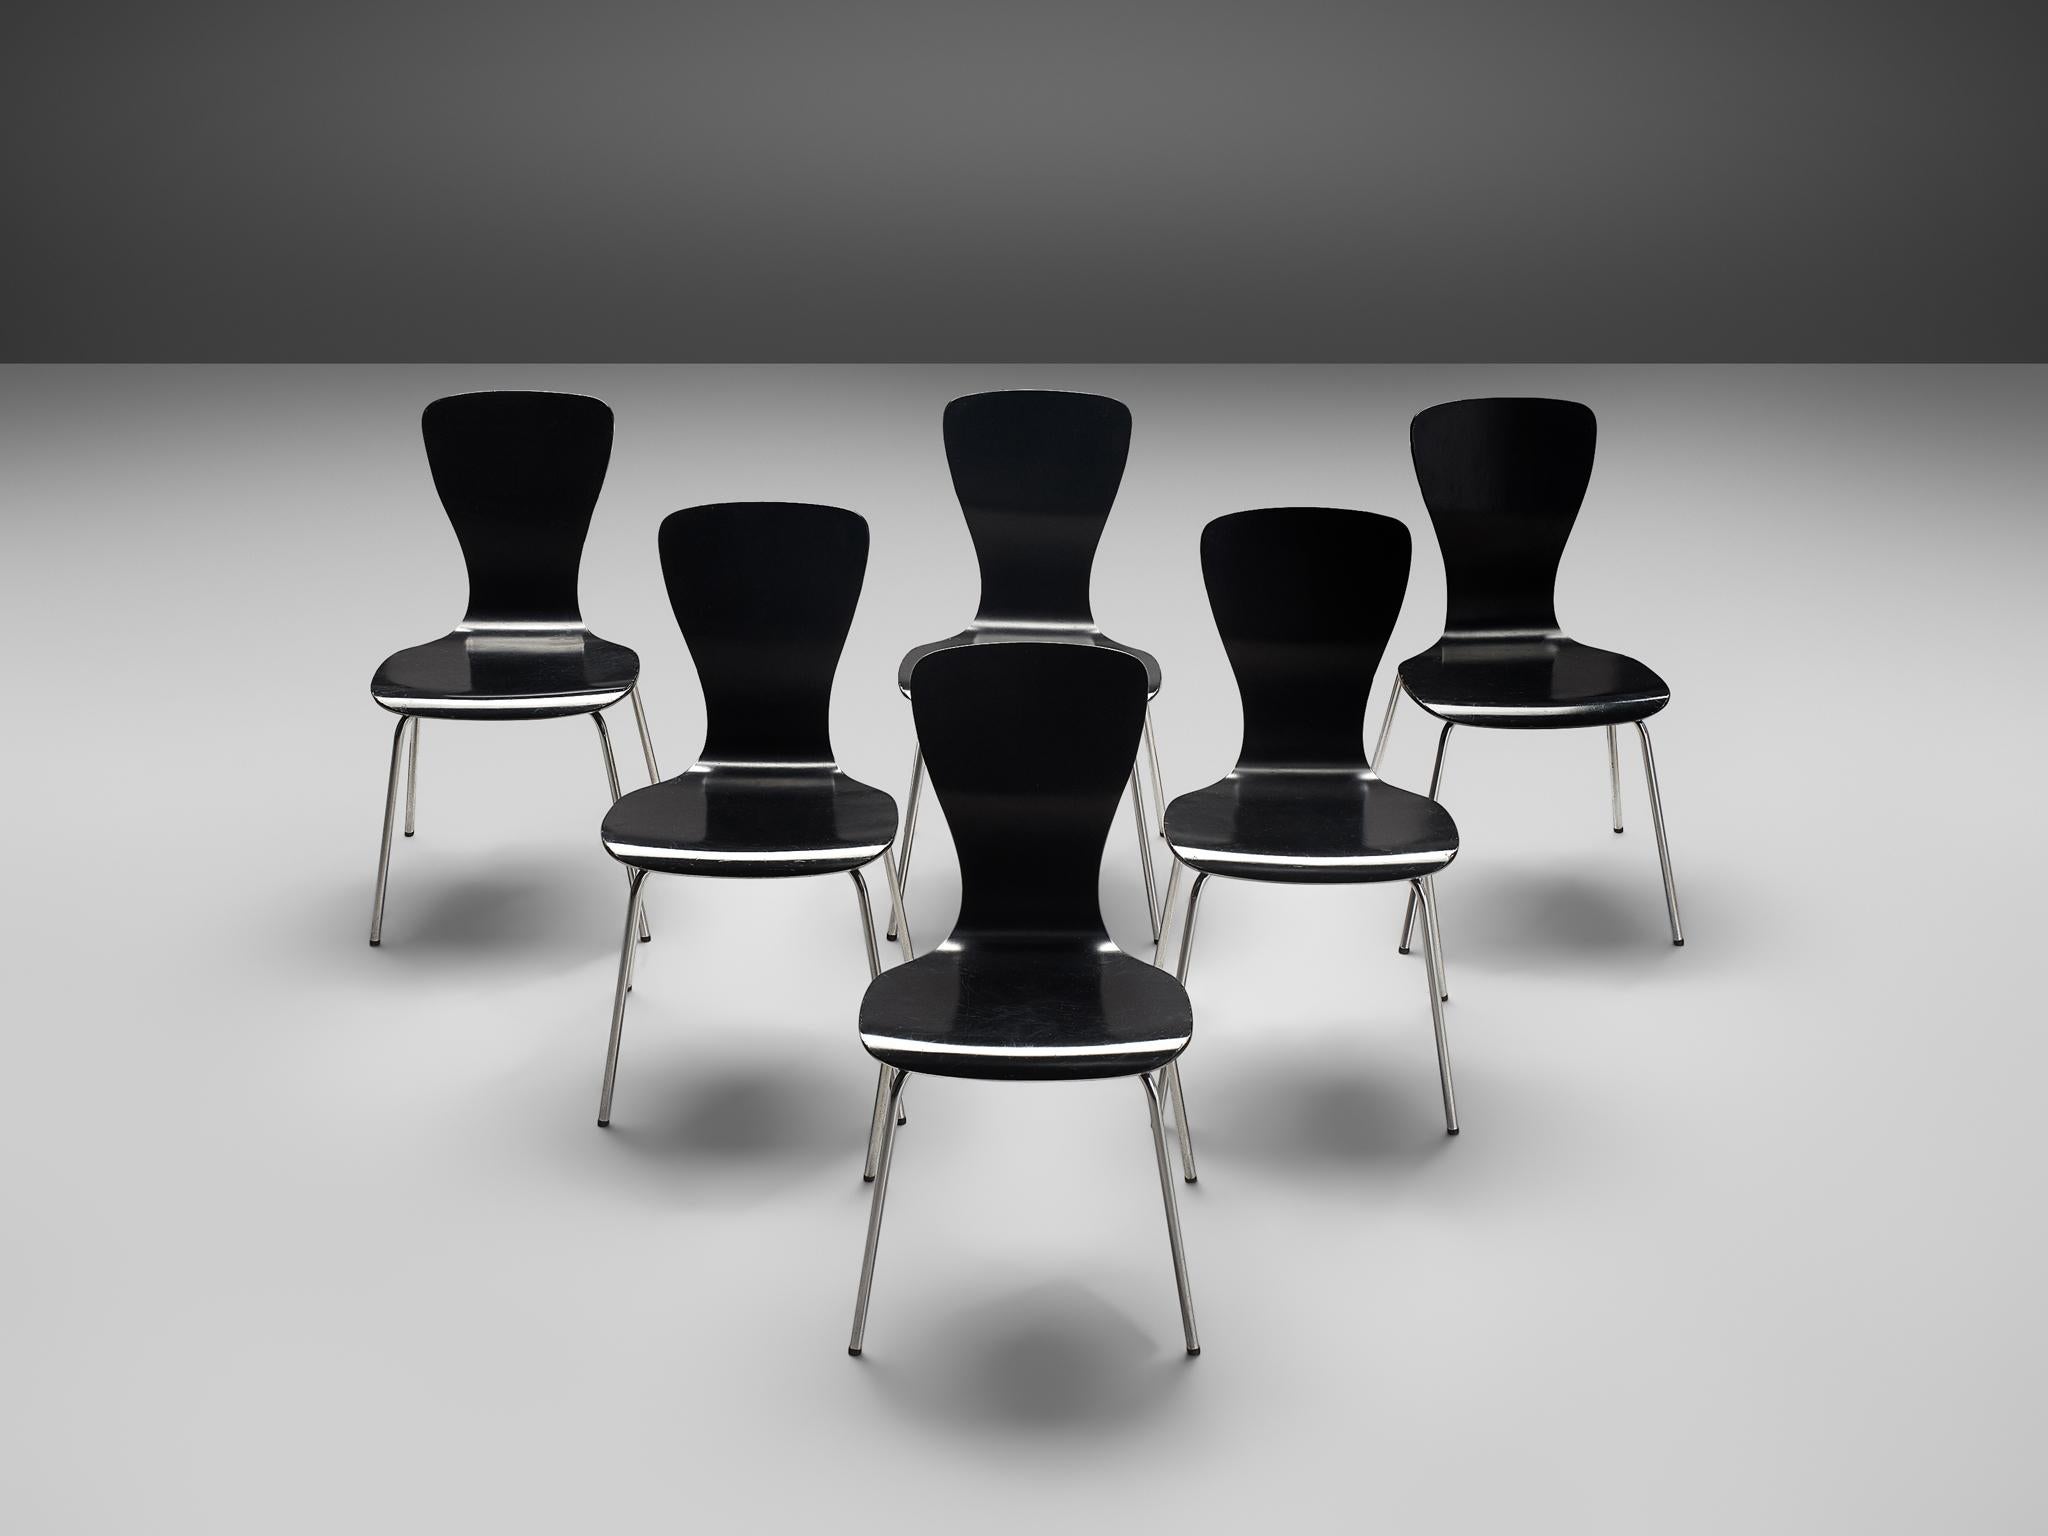 Tapio Wirkkala for Asko, set of six dining chairs, black lacquered plywood, metal, Finland, 1950s

Beautiful 'Nikke' set of six dining chairs design by the Finnish designer Tapio Wirkkala. This model is a wonderful example of an early minimalist